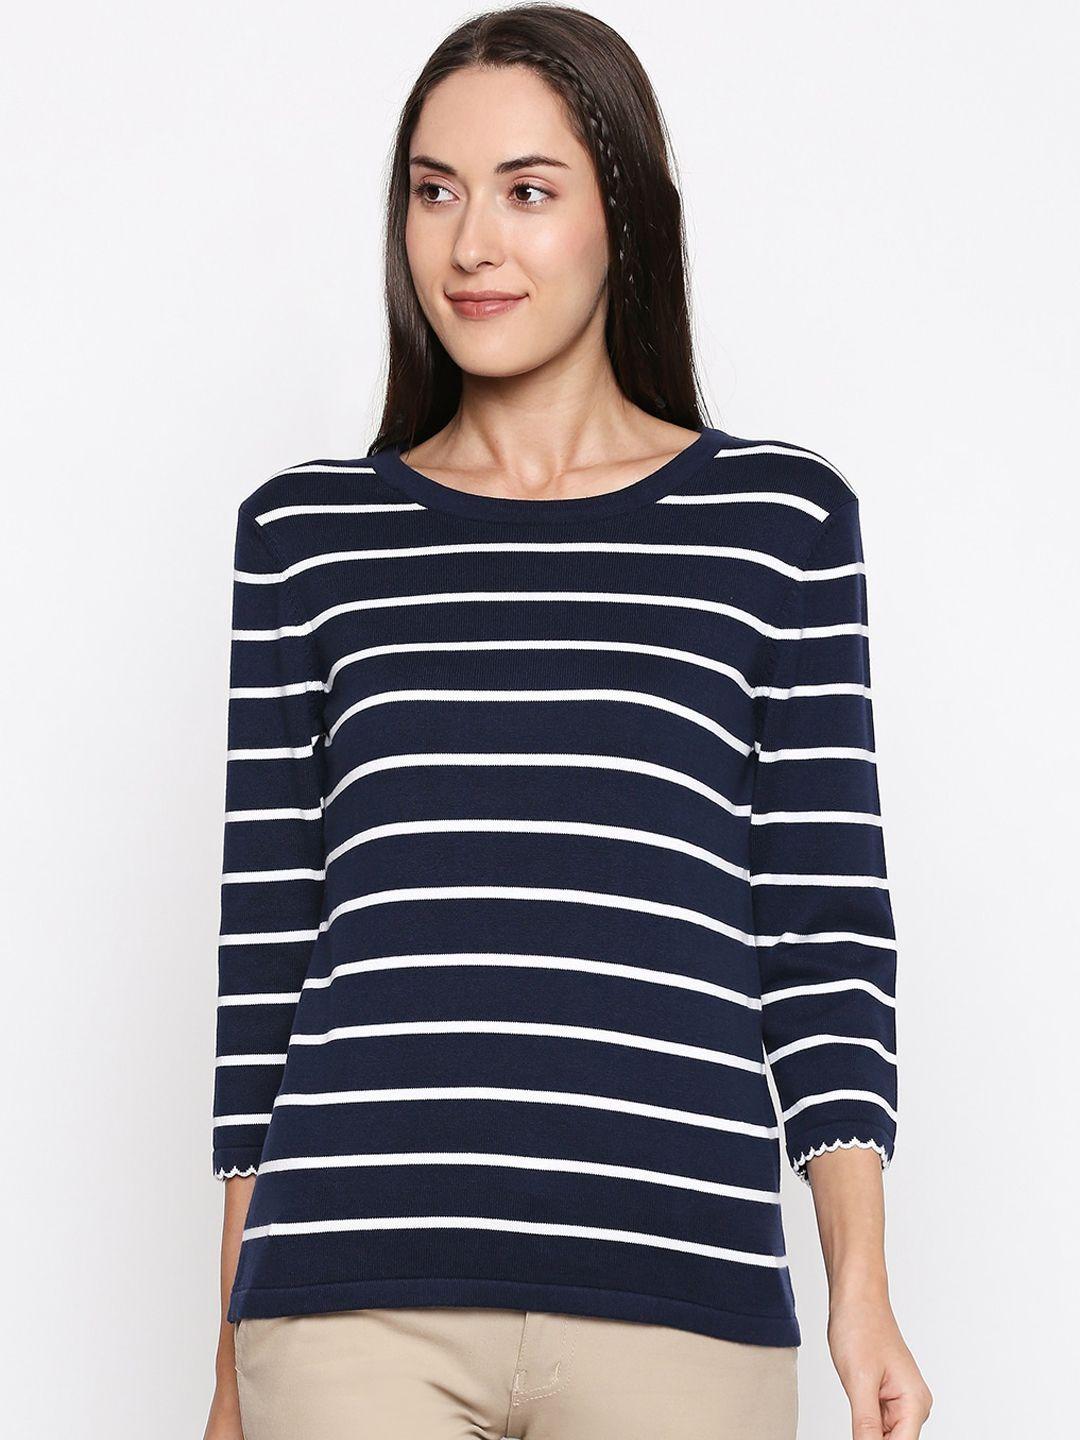 annabelle by pantaloons women navy blue & white striped pullover sweater